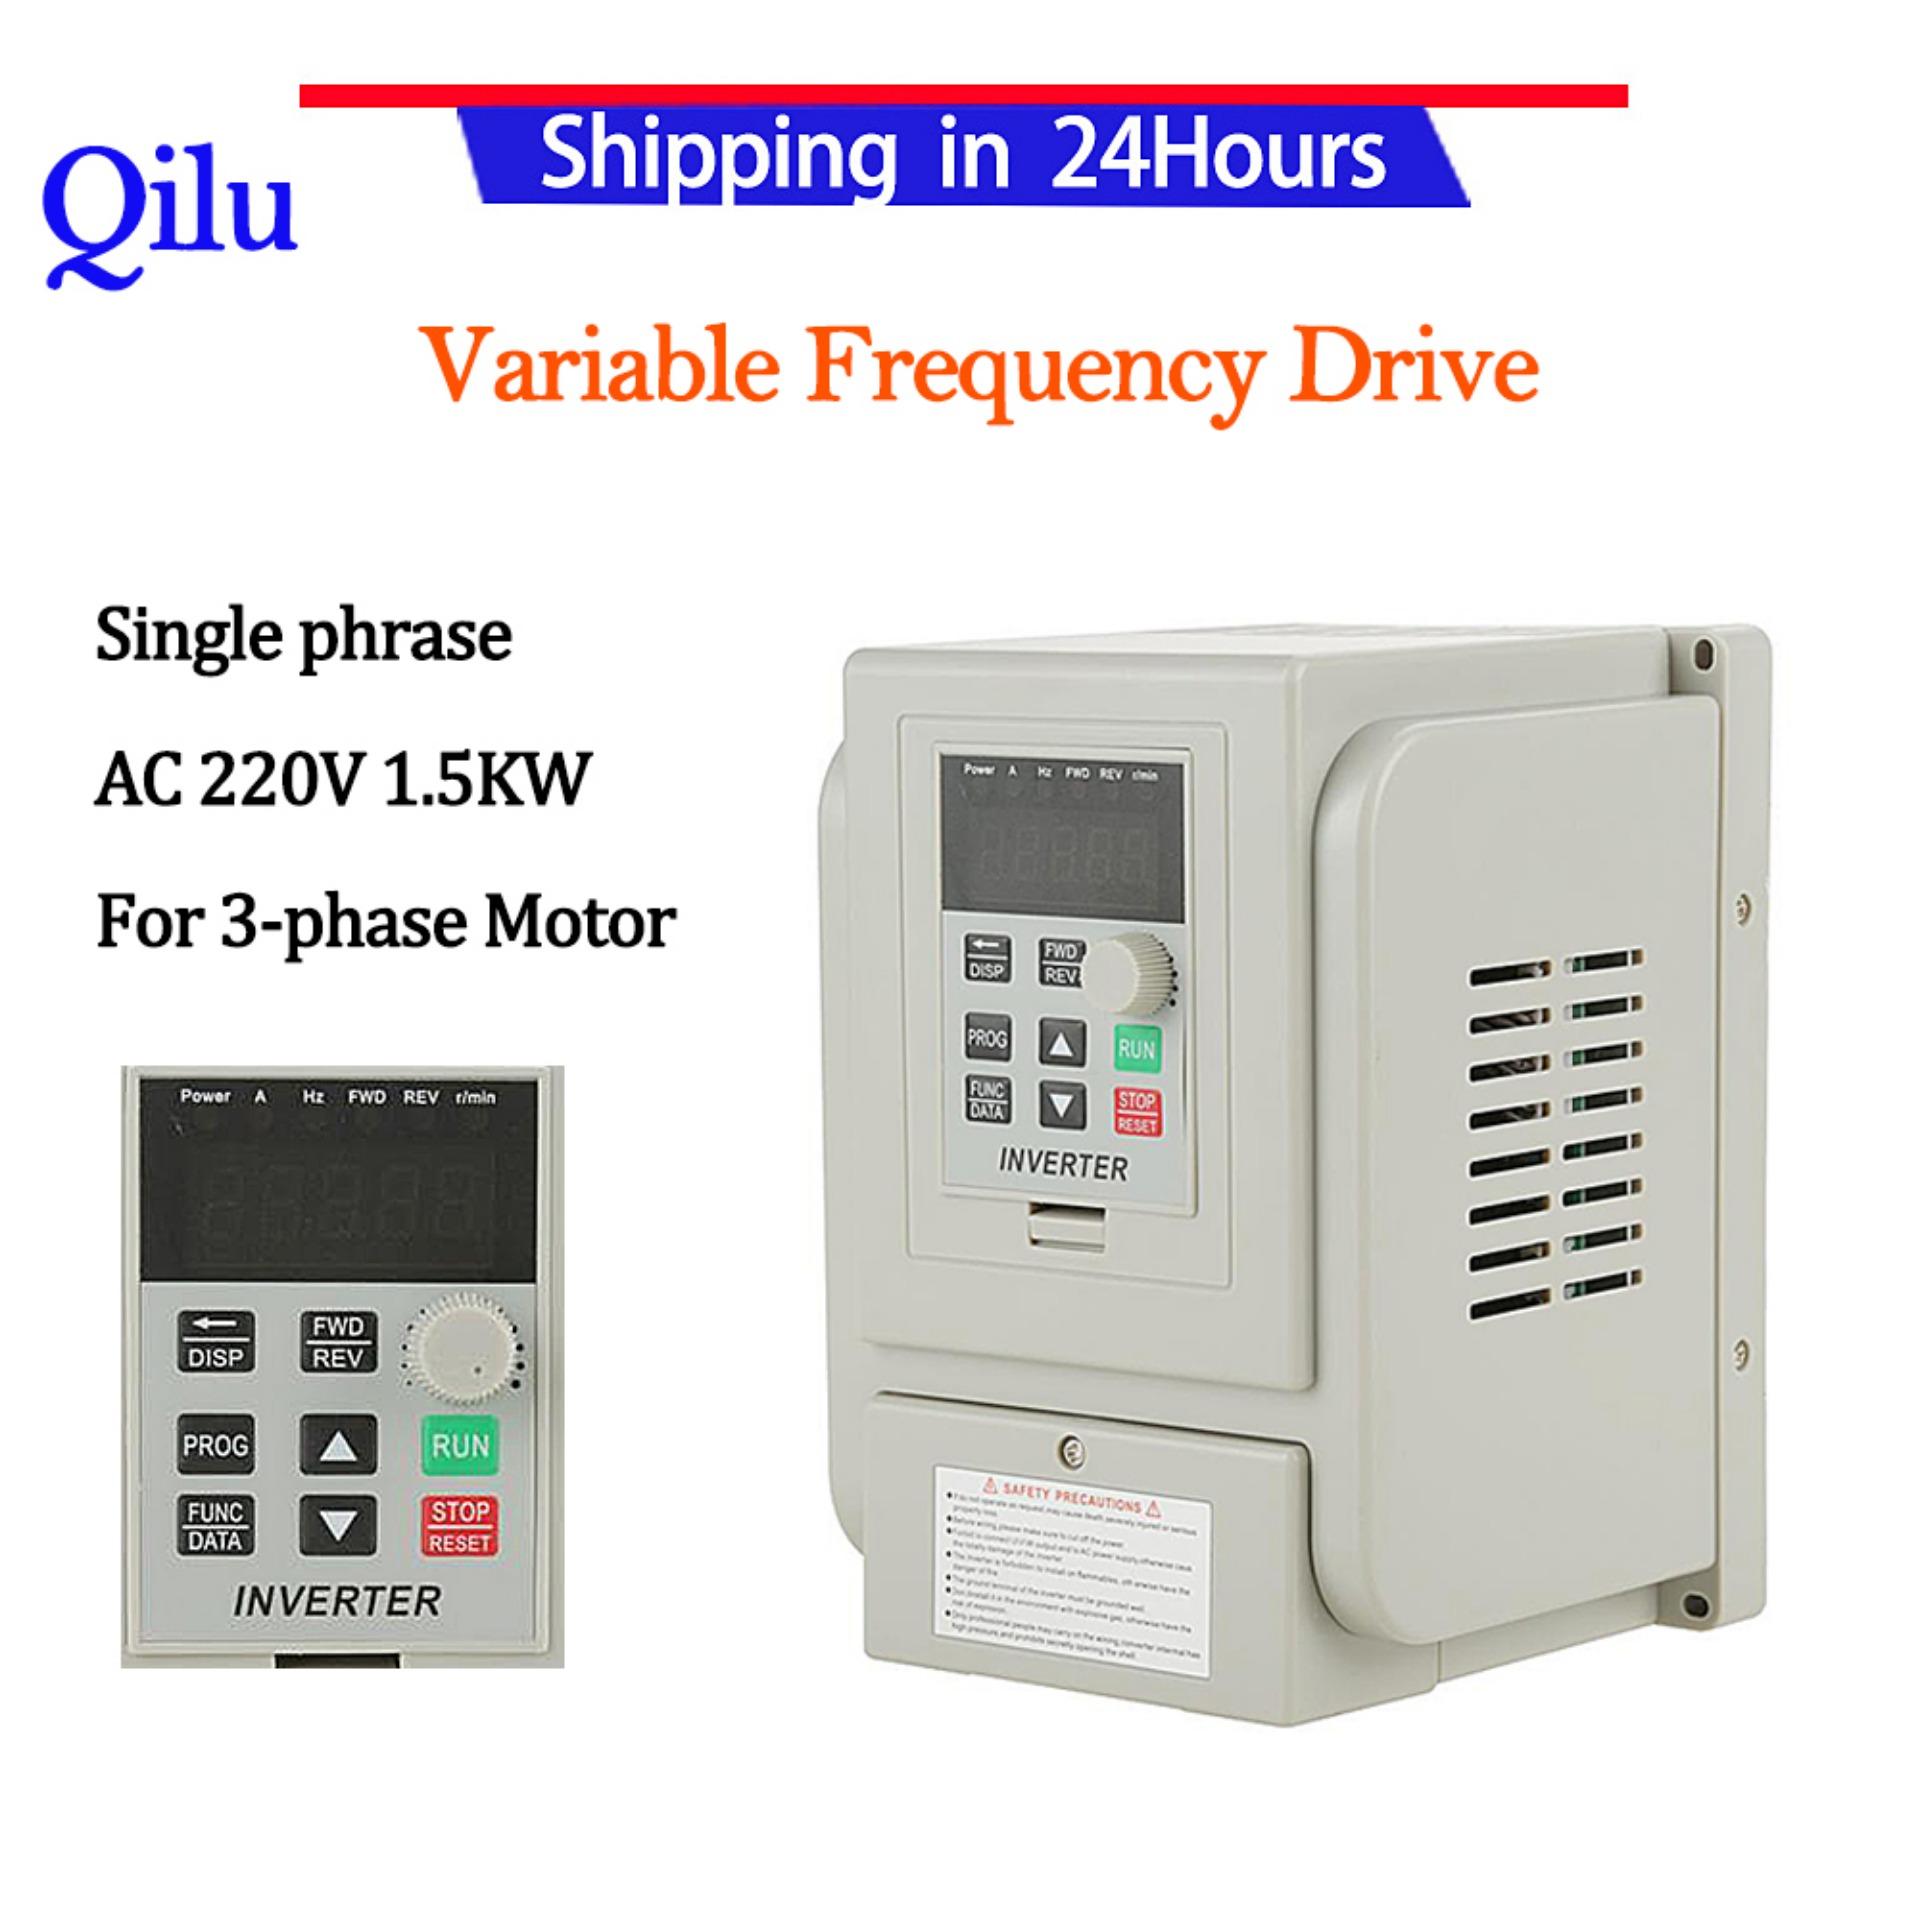 Variable Frequency Drive 1pc AC 220V 0.75kW Variable Frequency Drive VFD Speed Controller Inverter Single Phrase 